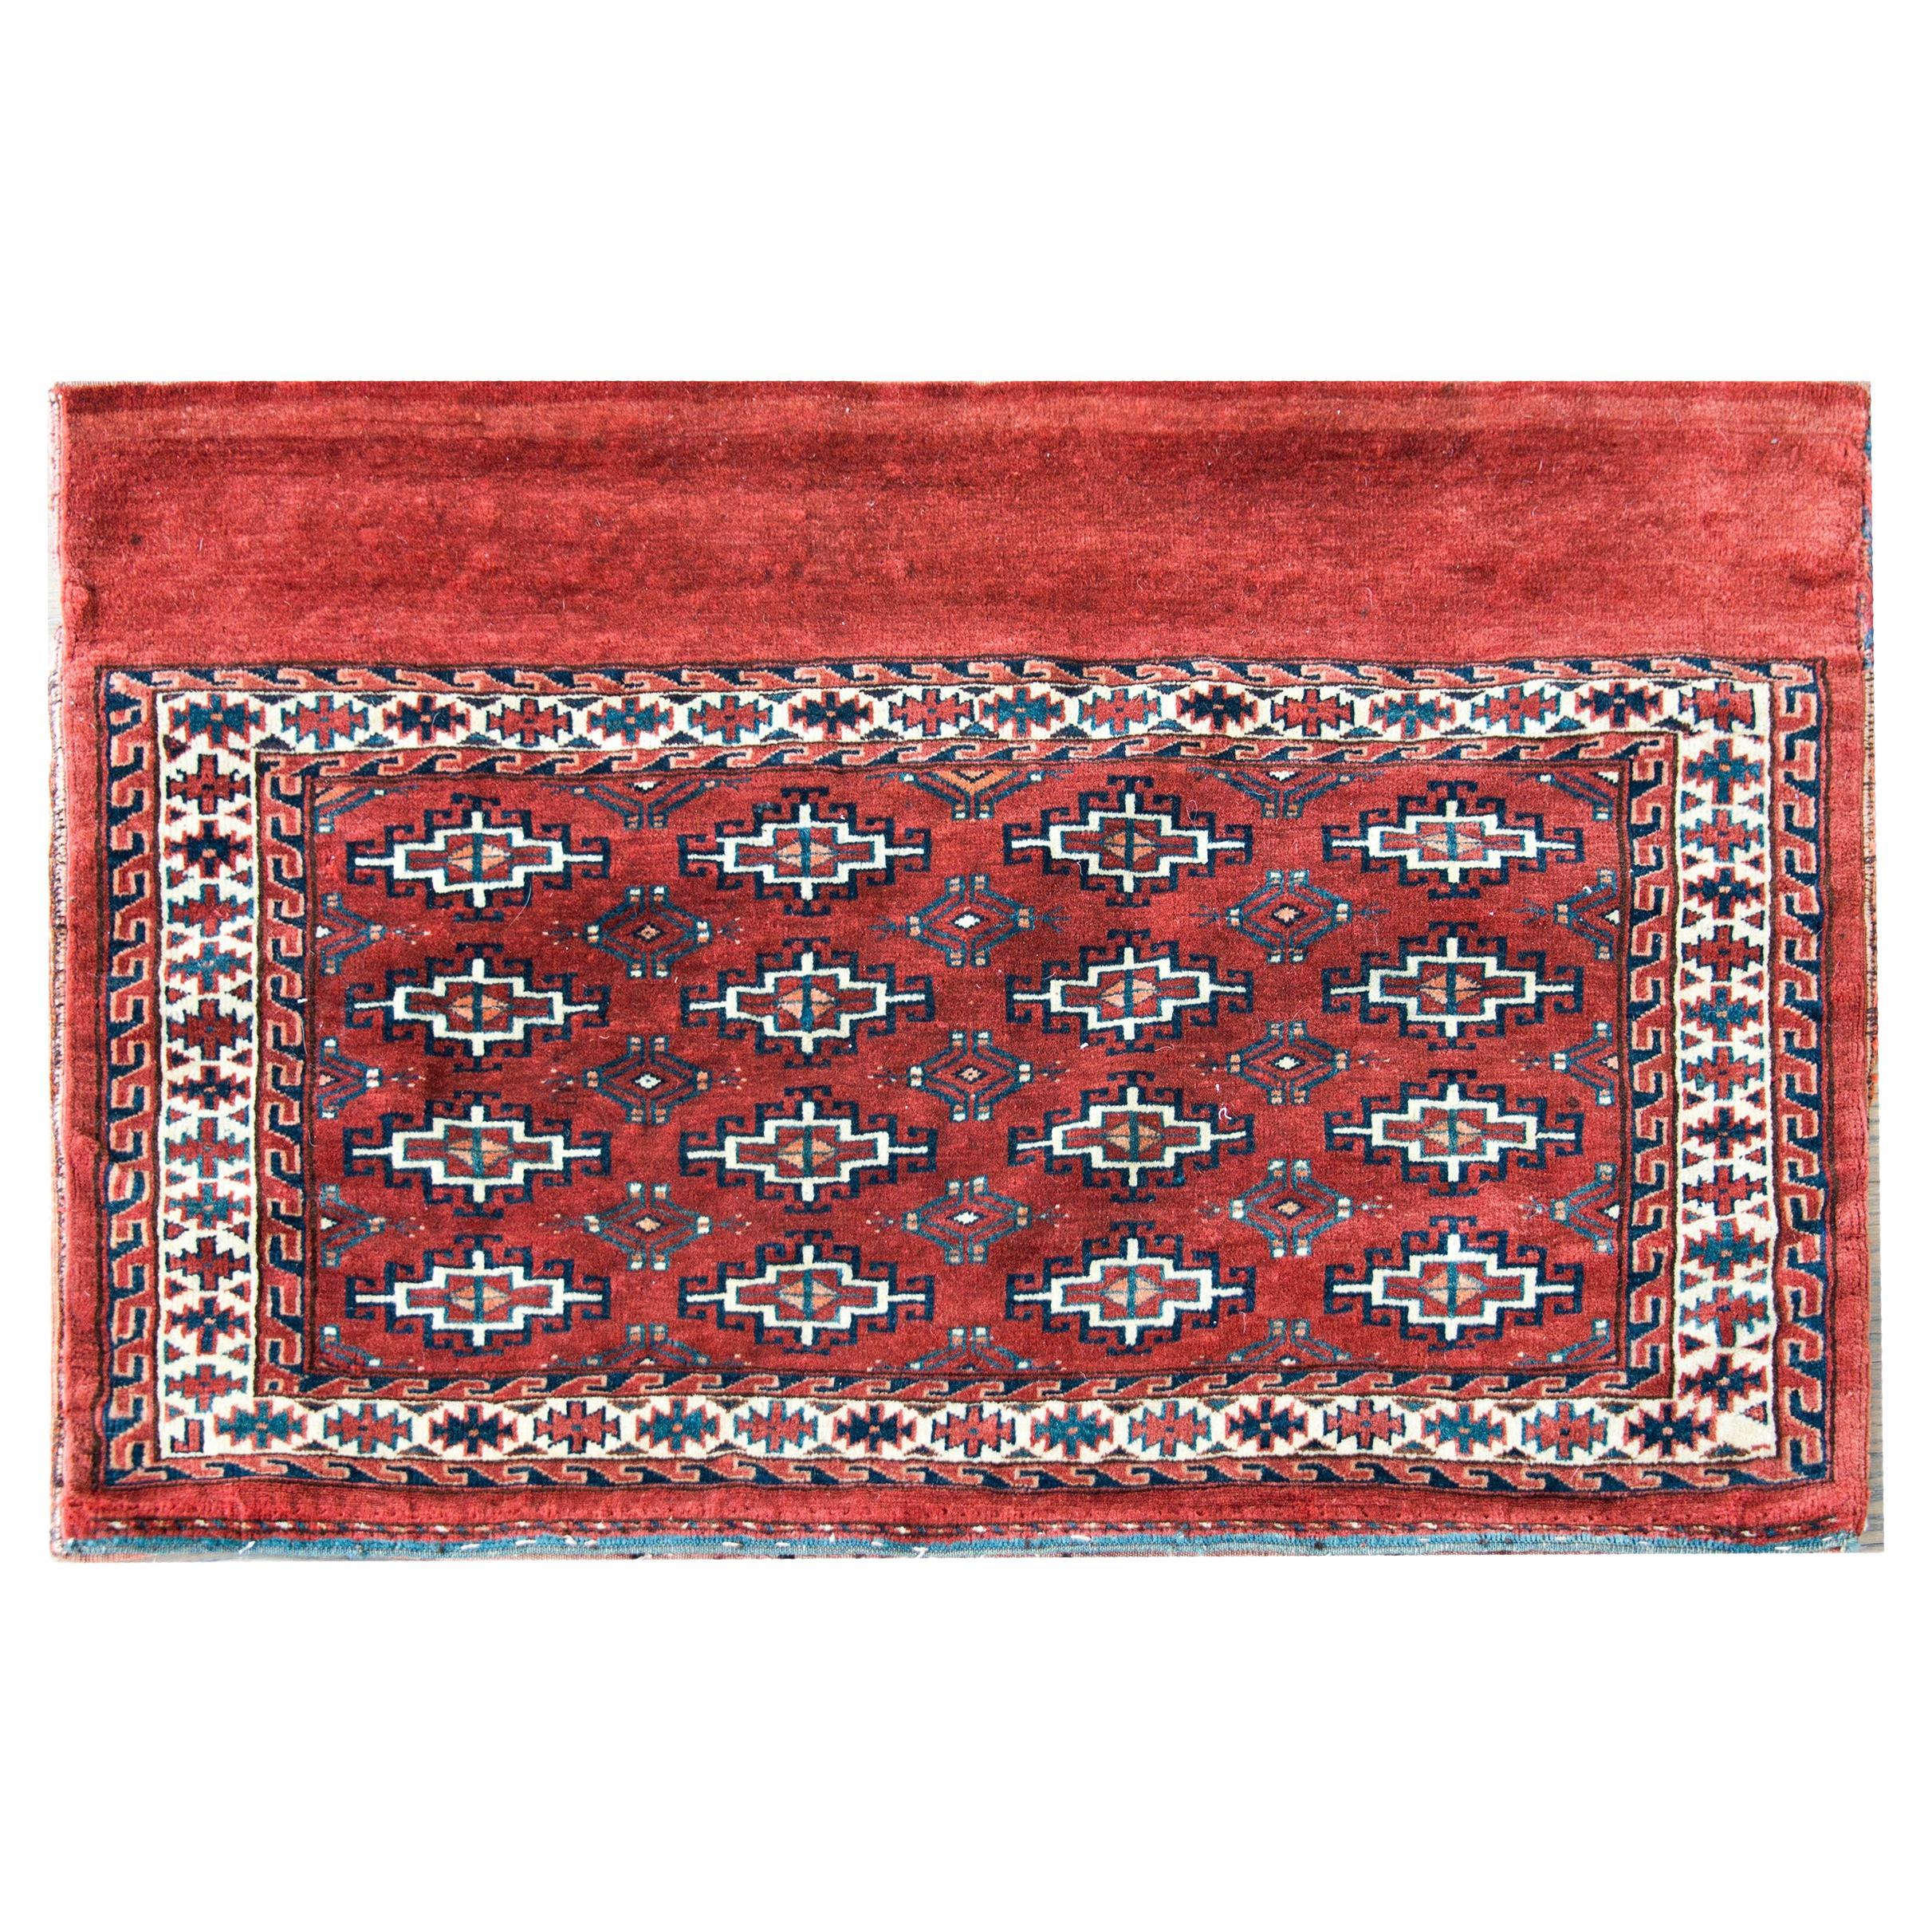 Early 20th Century Turkman Bag Face Rug